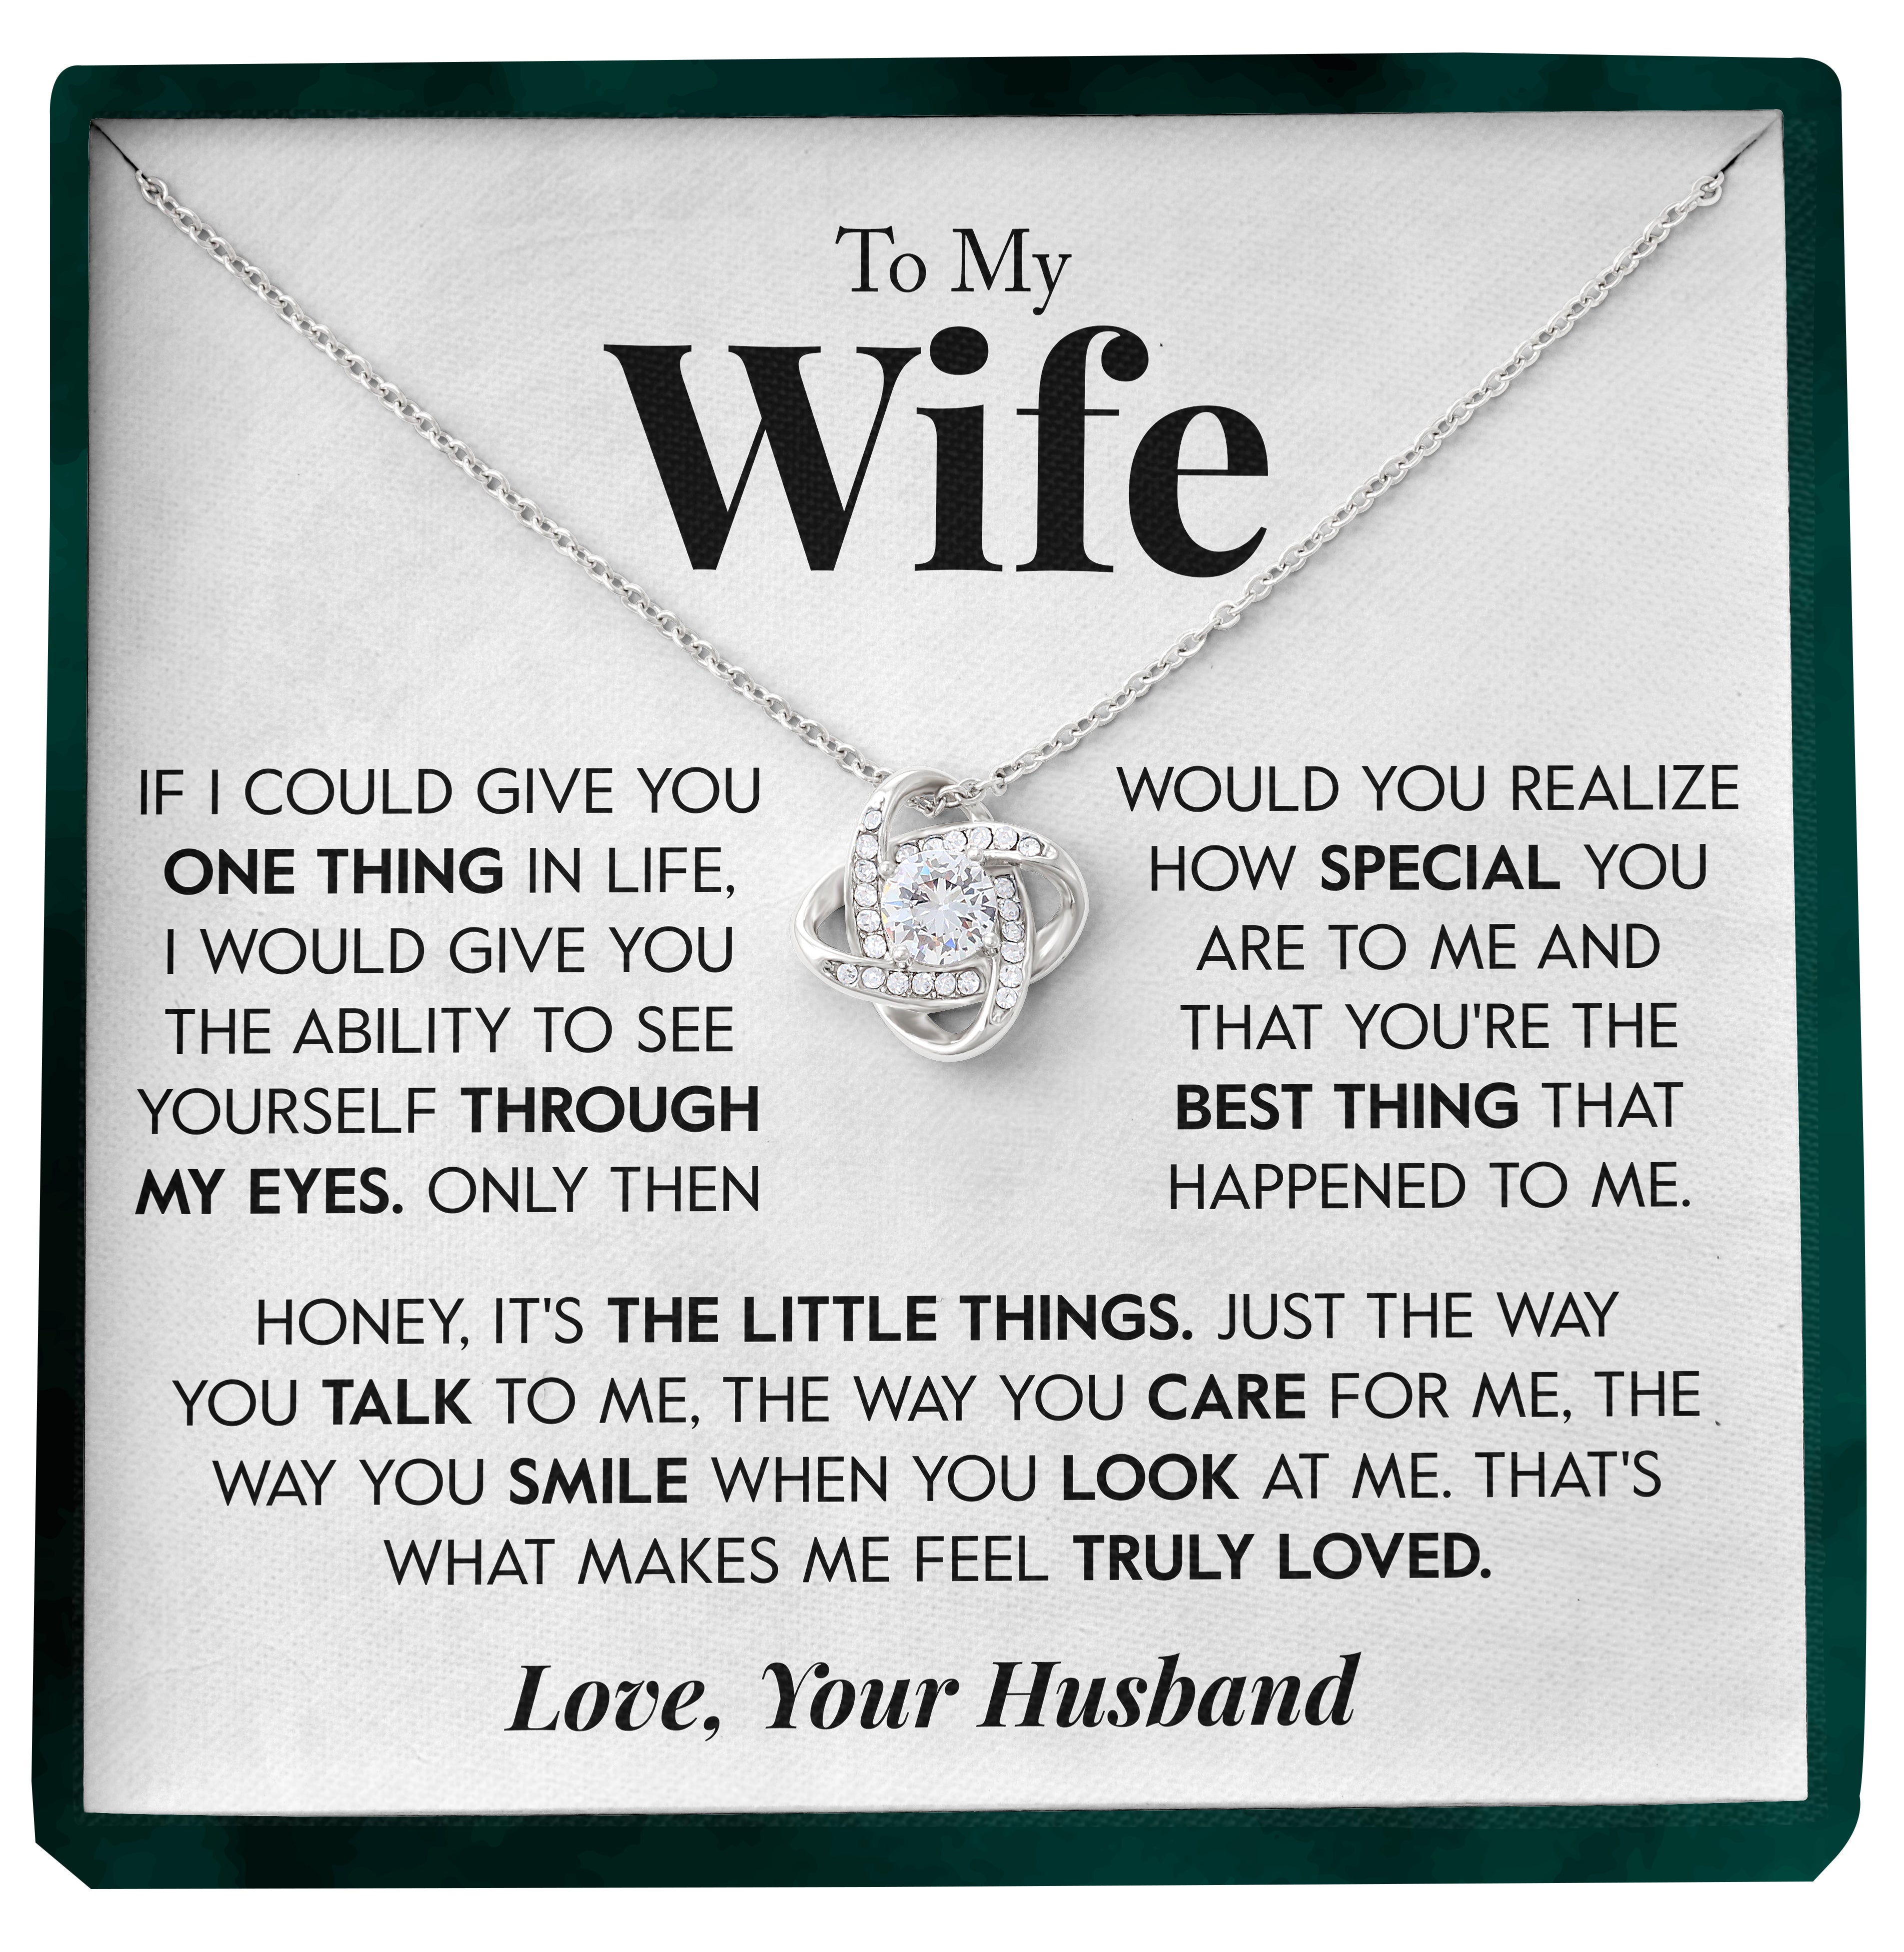 To My Wife | "Truly Loved" | Love Knot Necklace